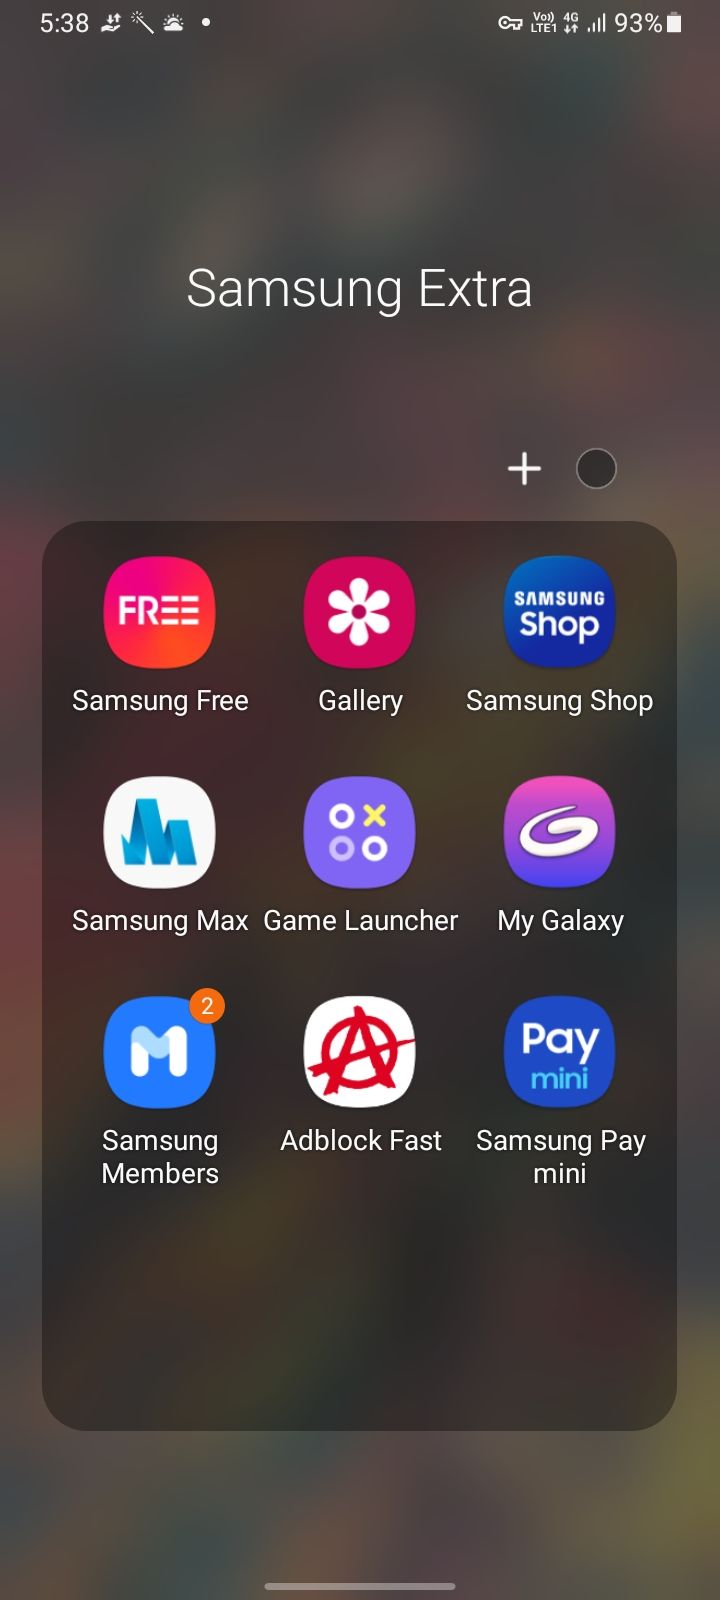 Samsung pay mini released for galaxy m12 - Page 2 - Samsung Members